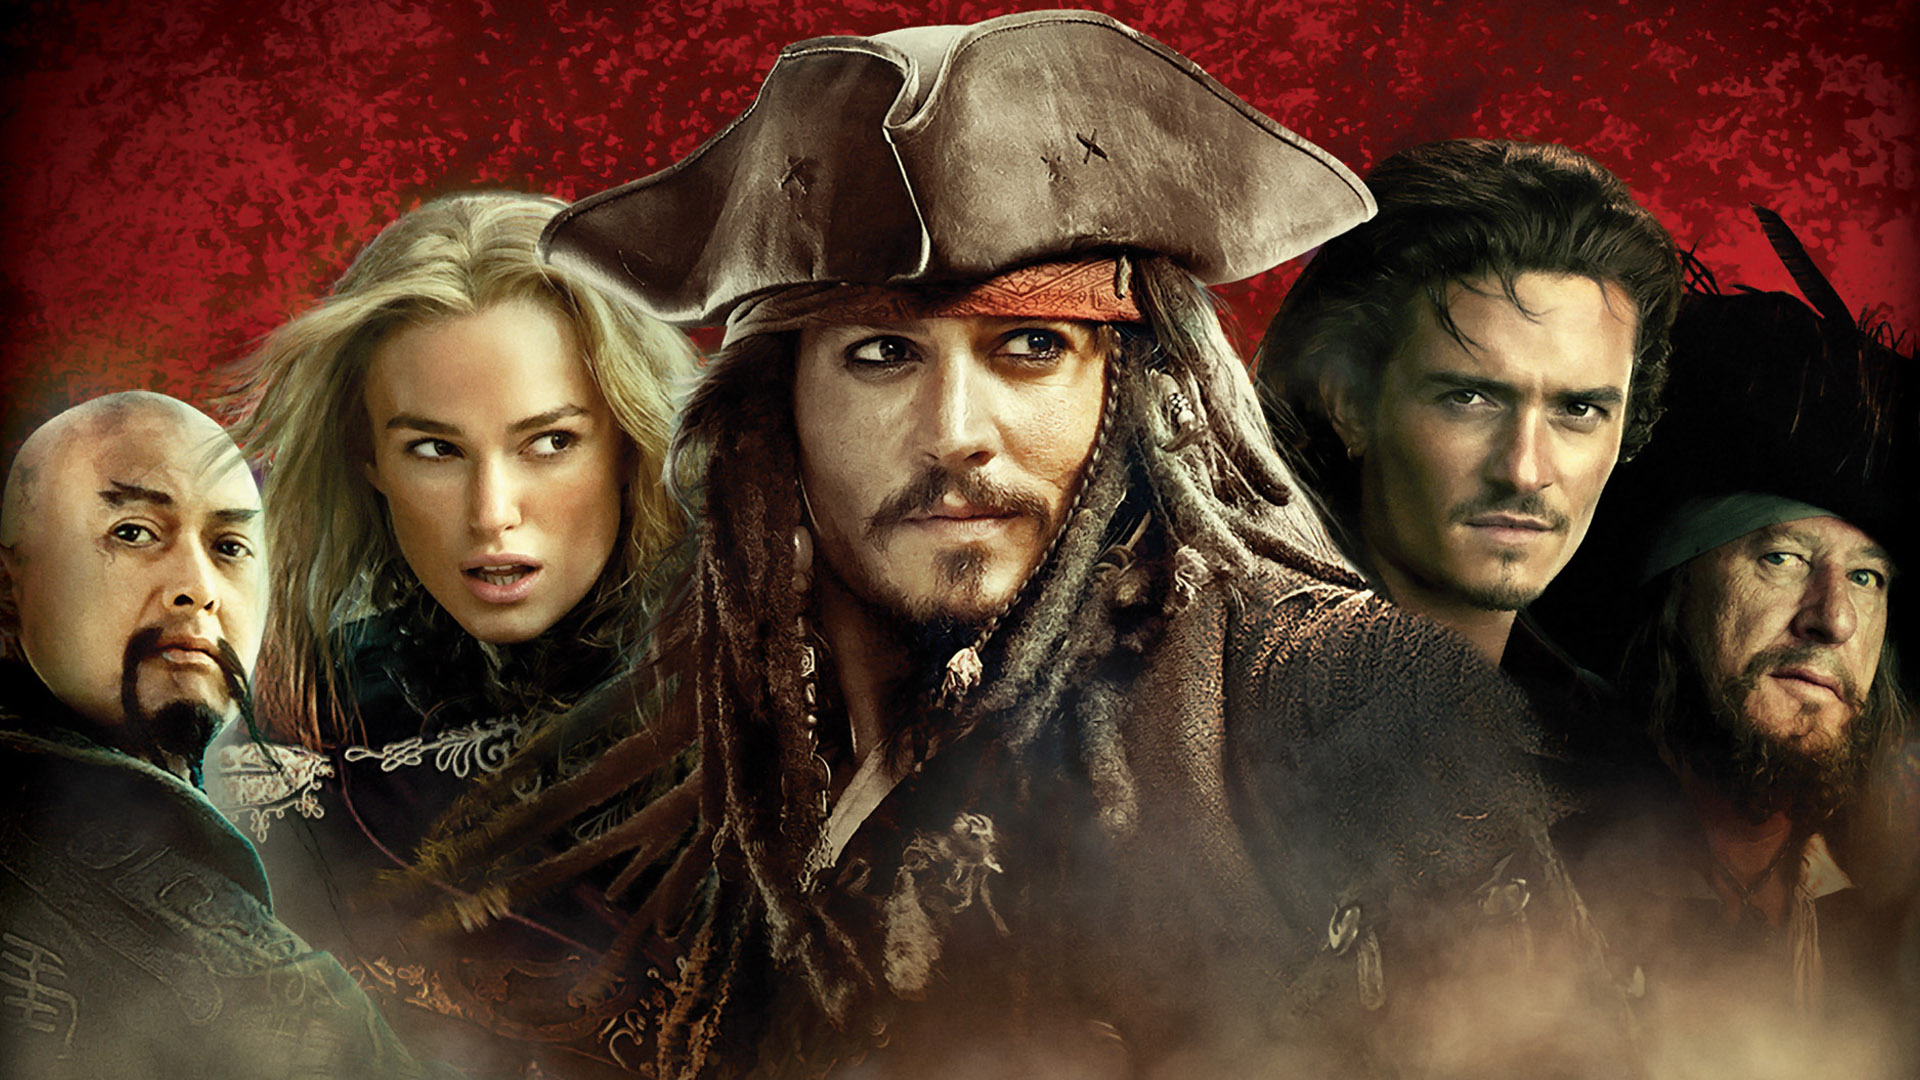 jack sparrow, geoffrey rush, movie, pirates of the caribbean: at world's end, captain sao feng, chow yun fat, elizabeth swann, hector barbossa, johnny depp, keira knightley, orlando bloom, will turner, pirates of the caribbean 4K Ultra